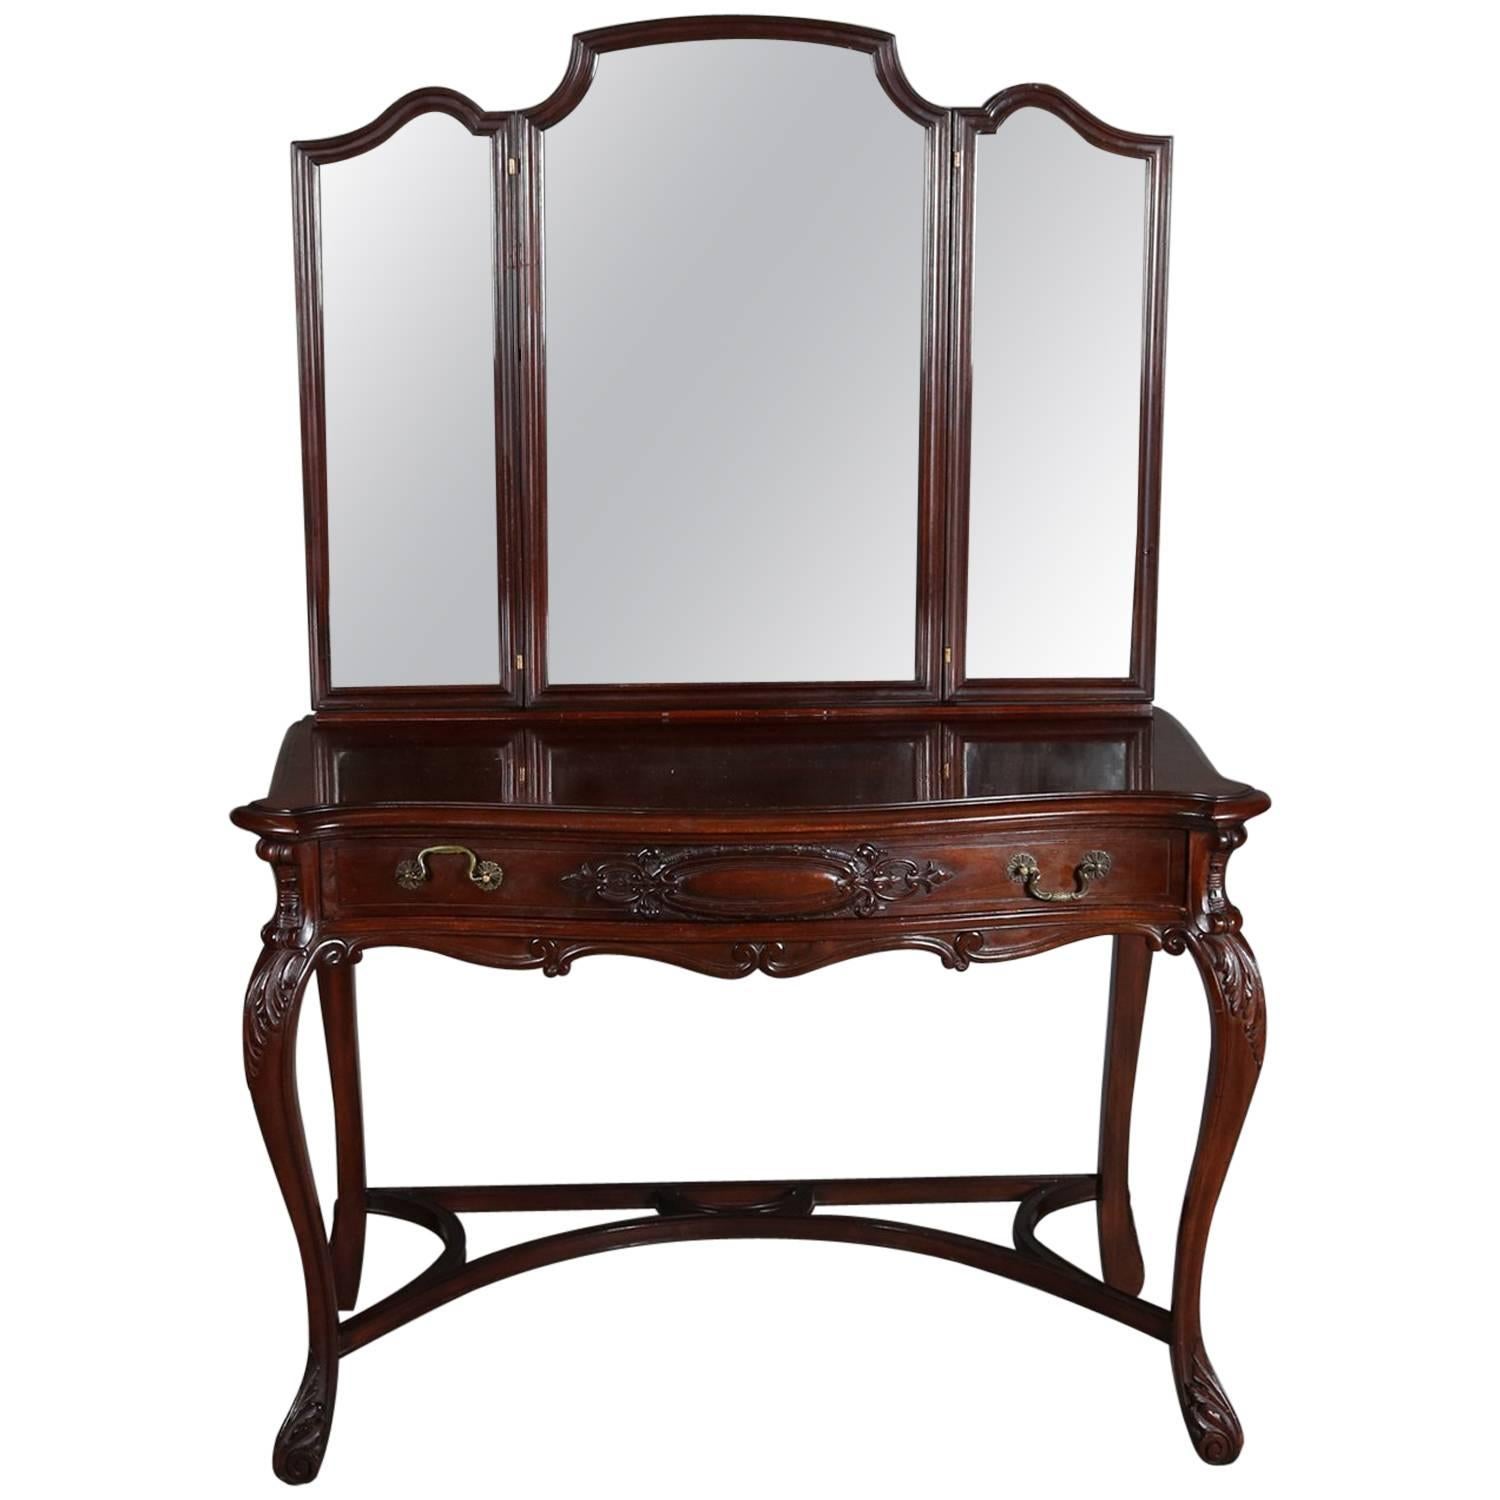 Antique Acanthus Carved Mahogany Triptych Mirrored Vanity, circa 1890